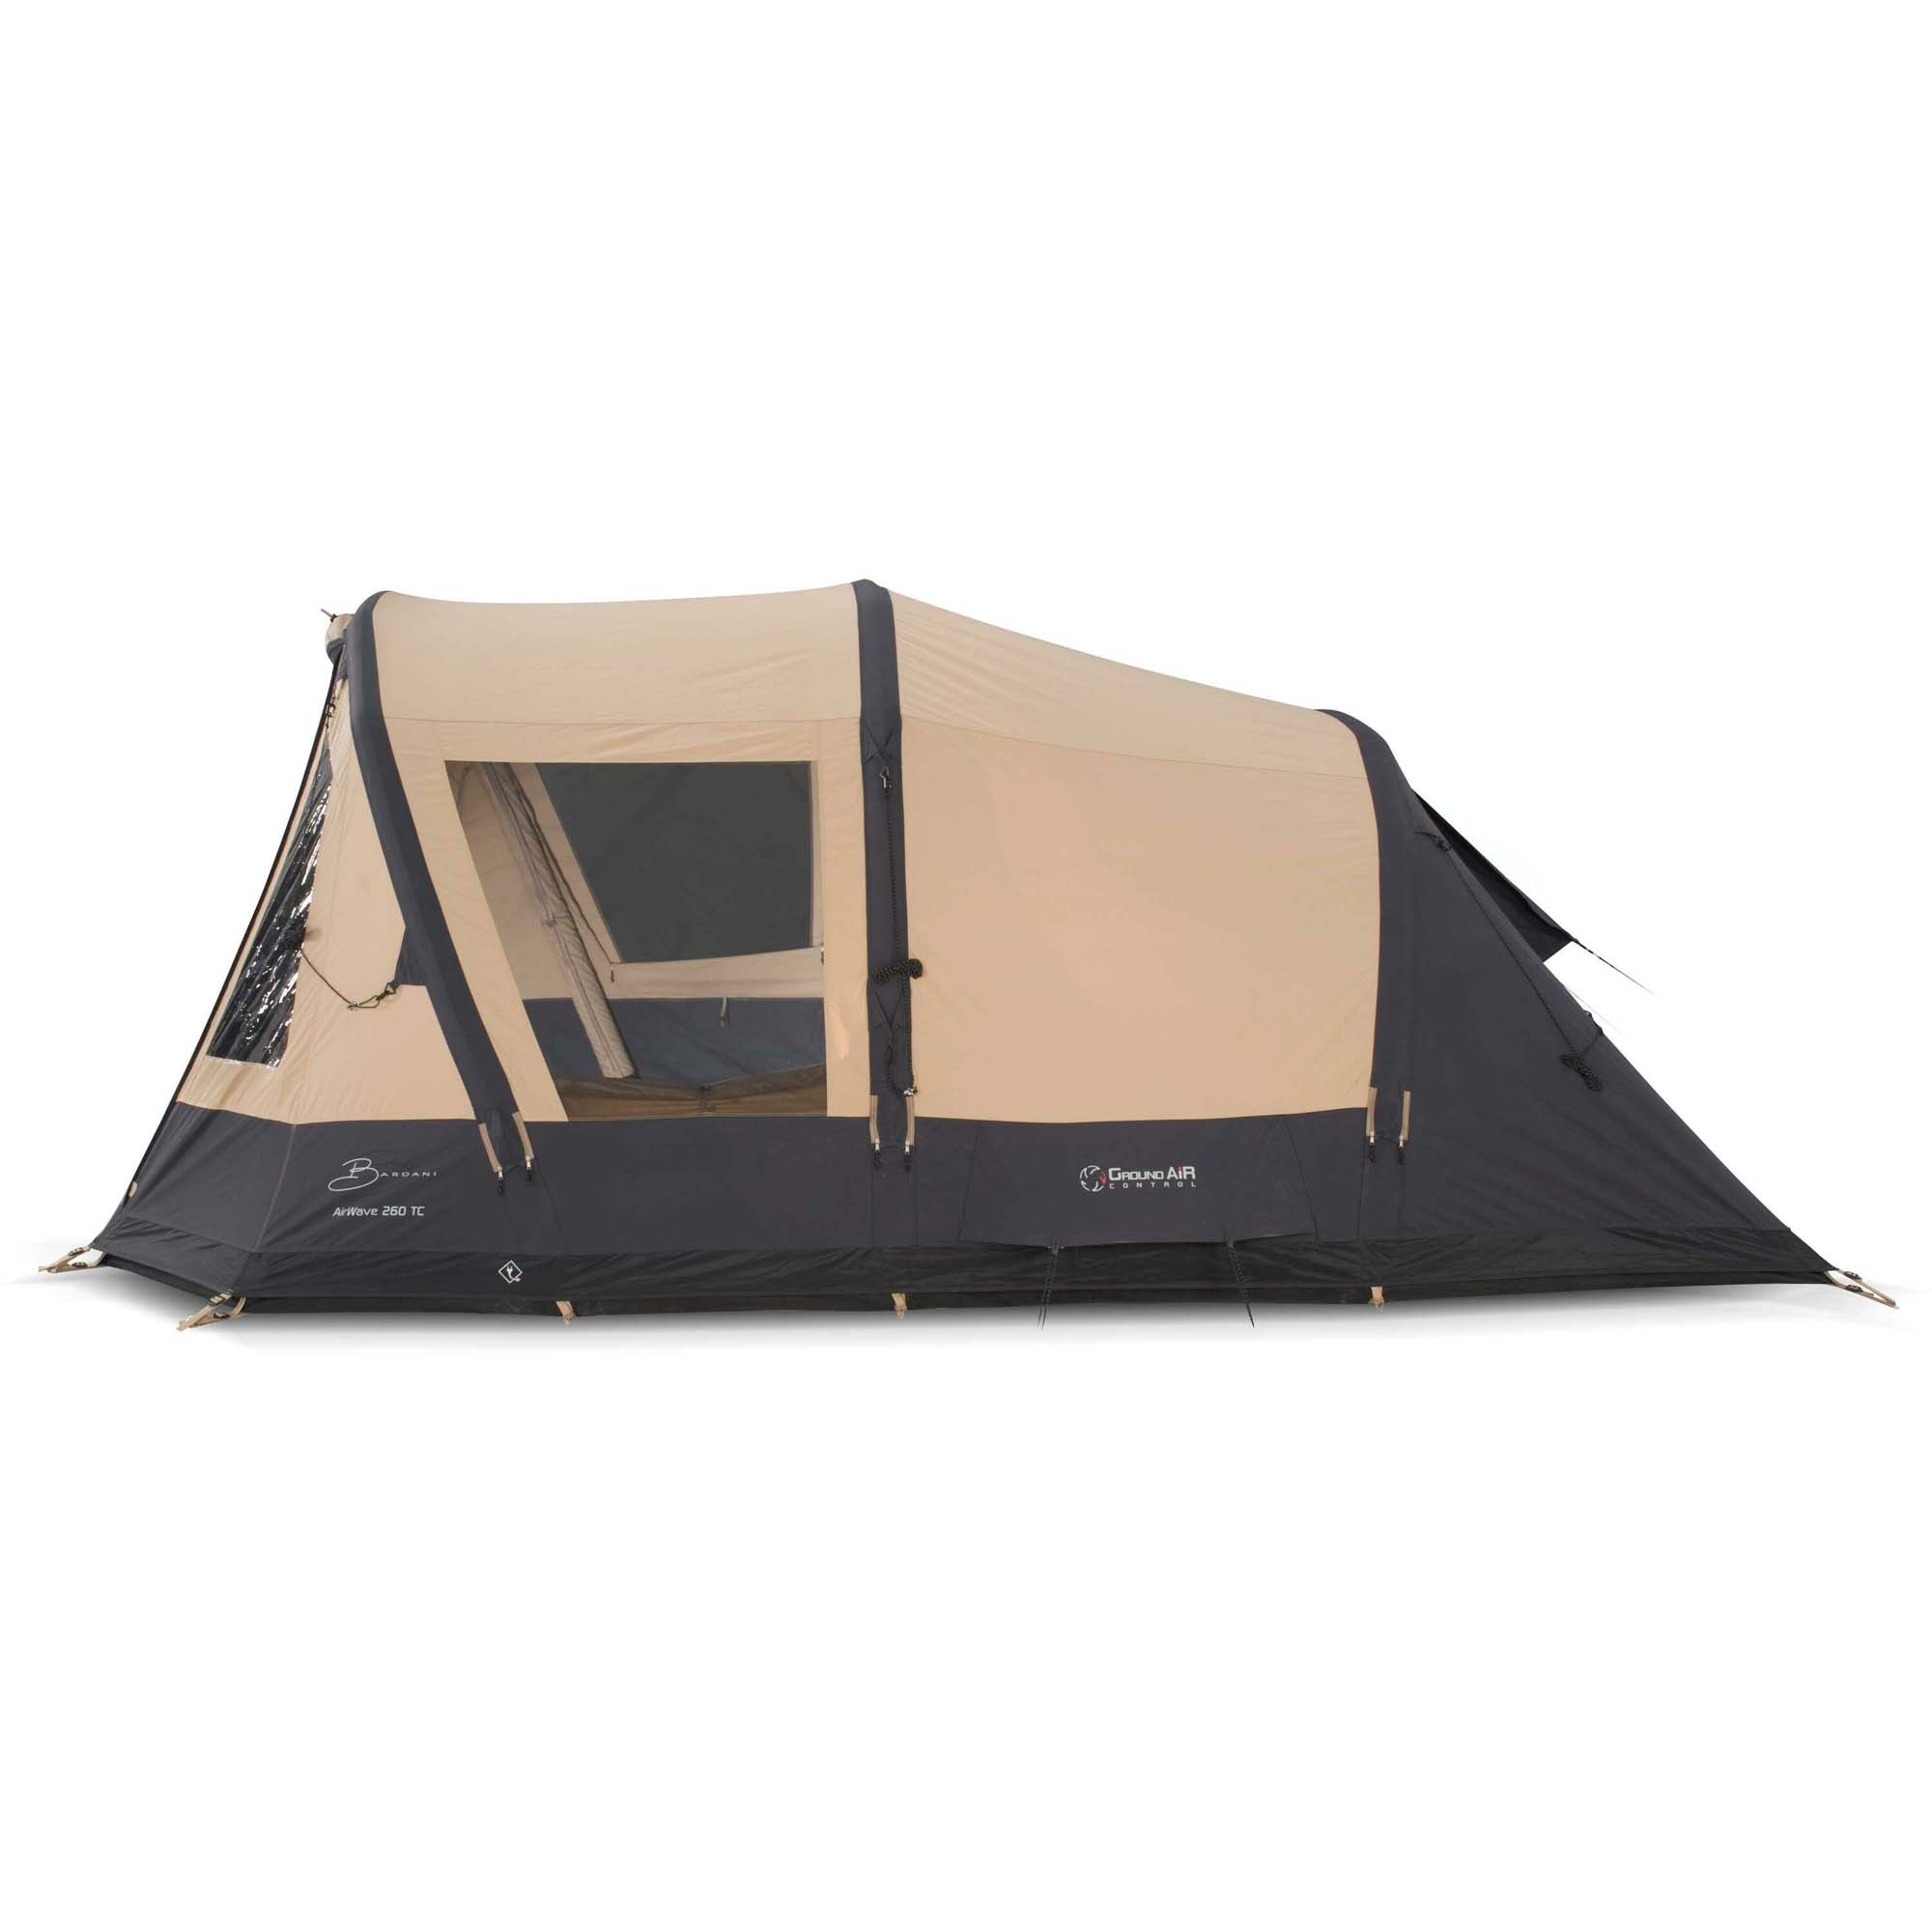 BARDANI Airwave 260 Tunneltent 4 Persoons